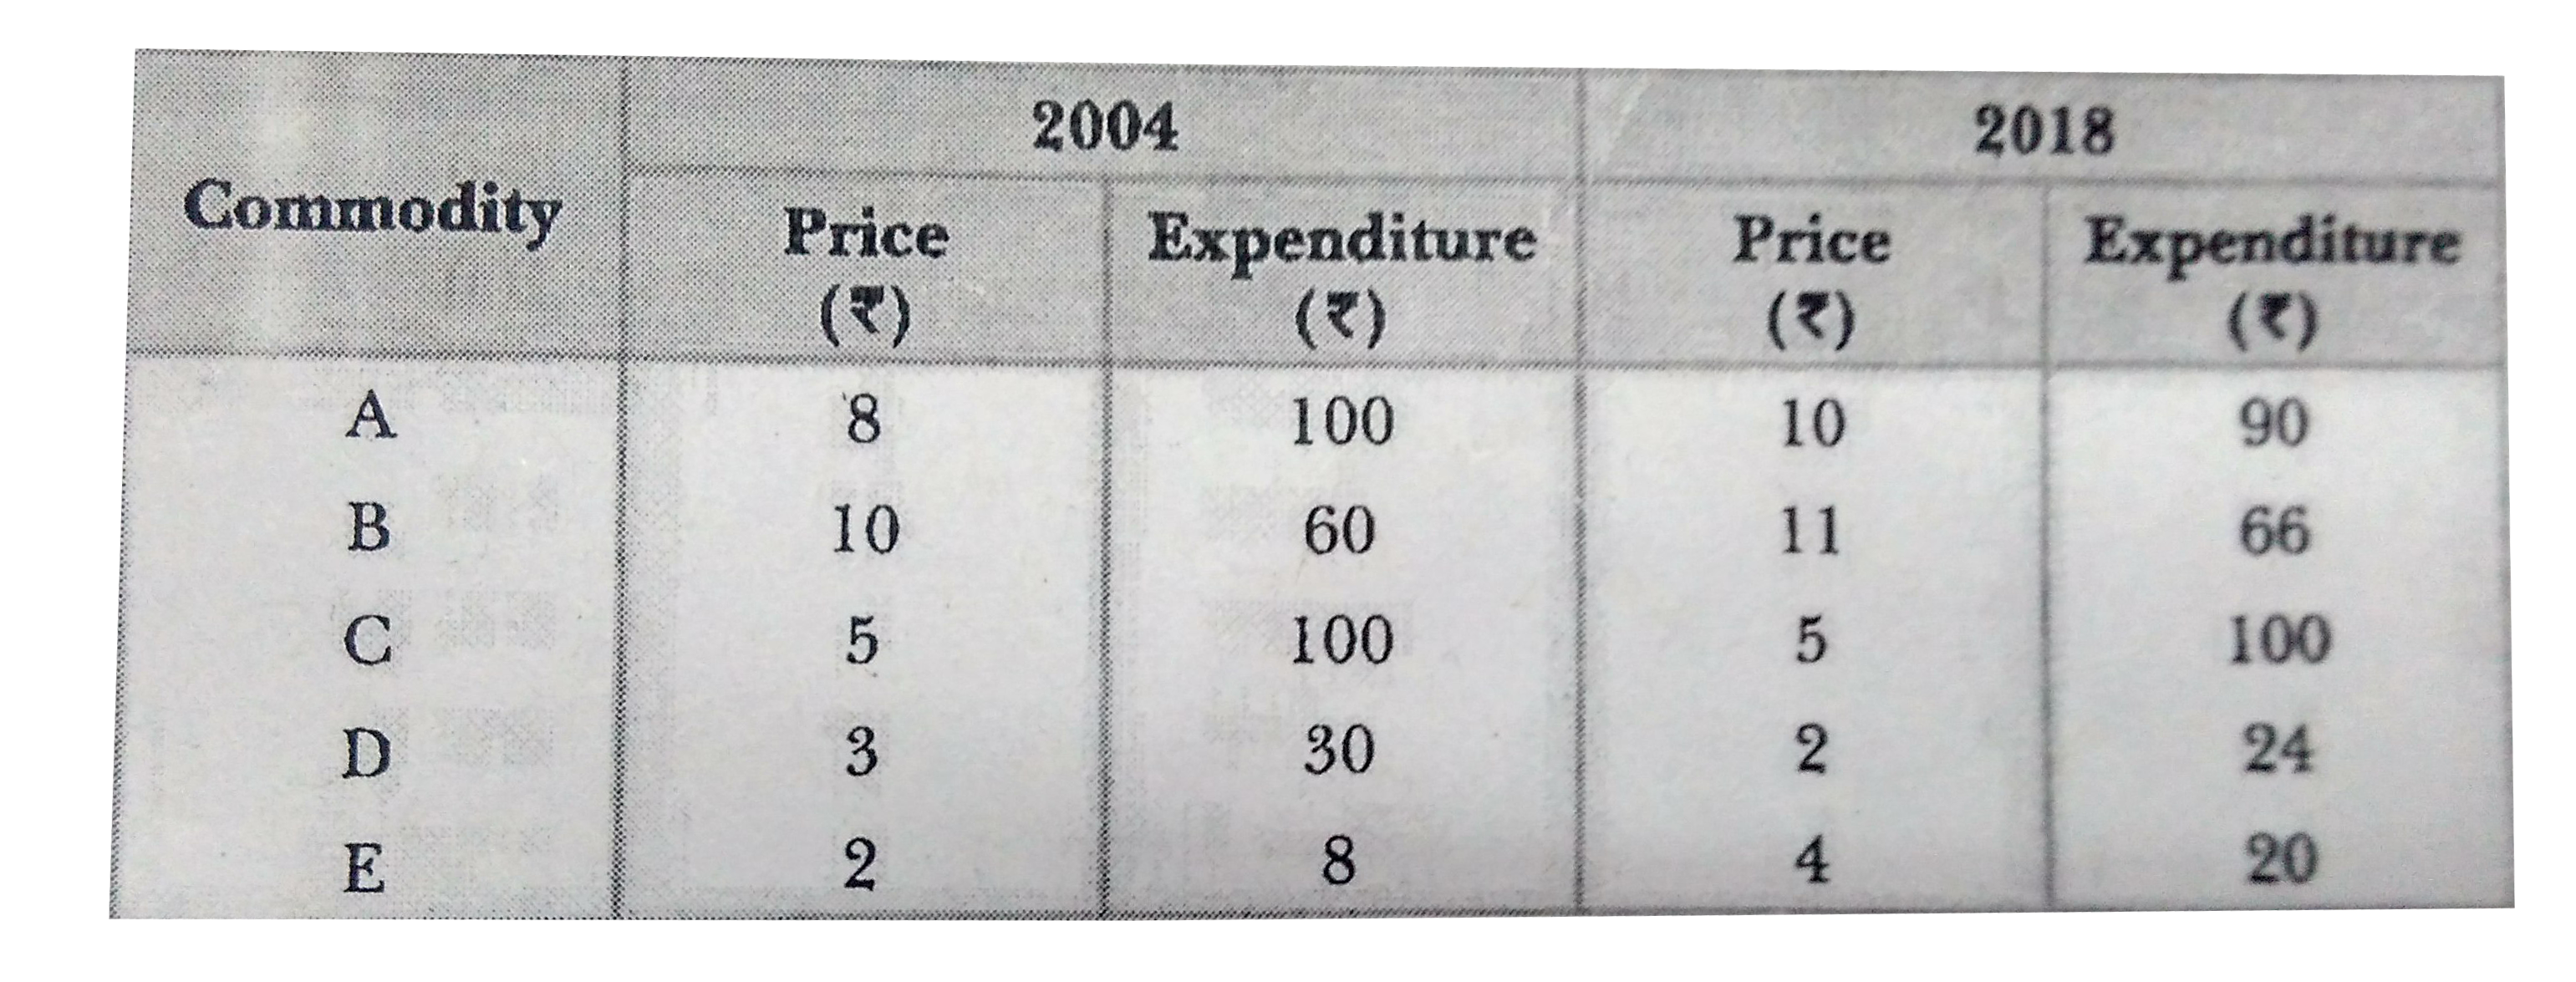 Construct index number of prices from the following data by (i) Laspeyre's Method, (ii) Paasche's Method, and (iii) Fisher Method.